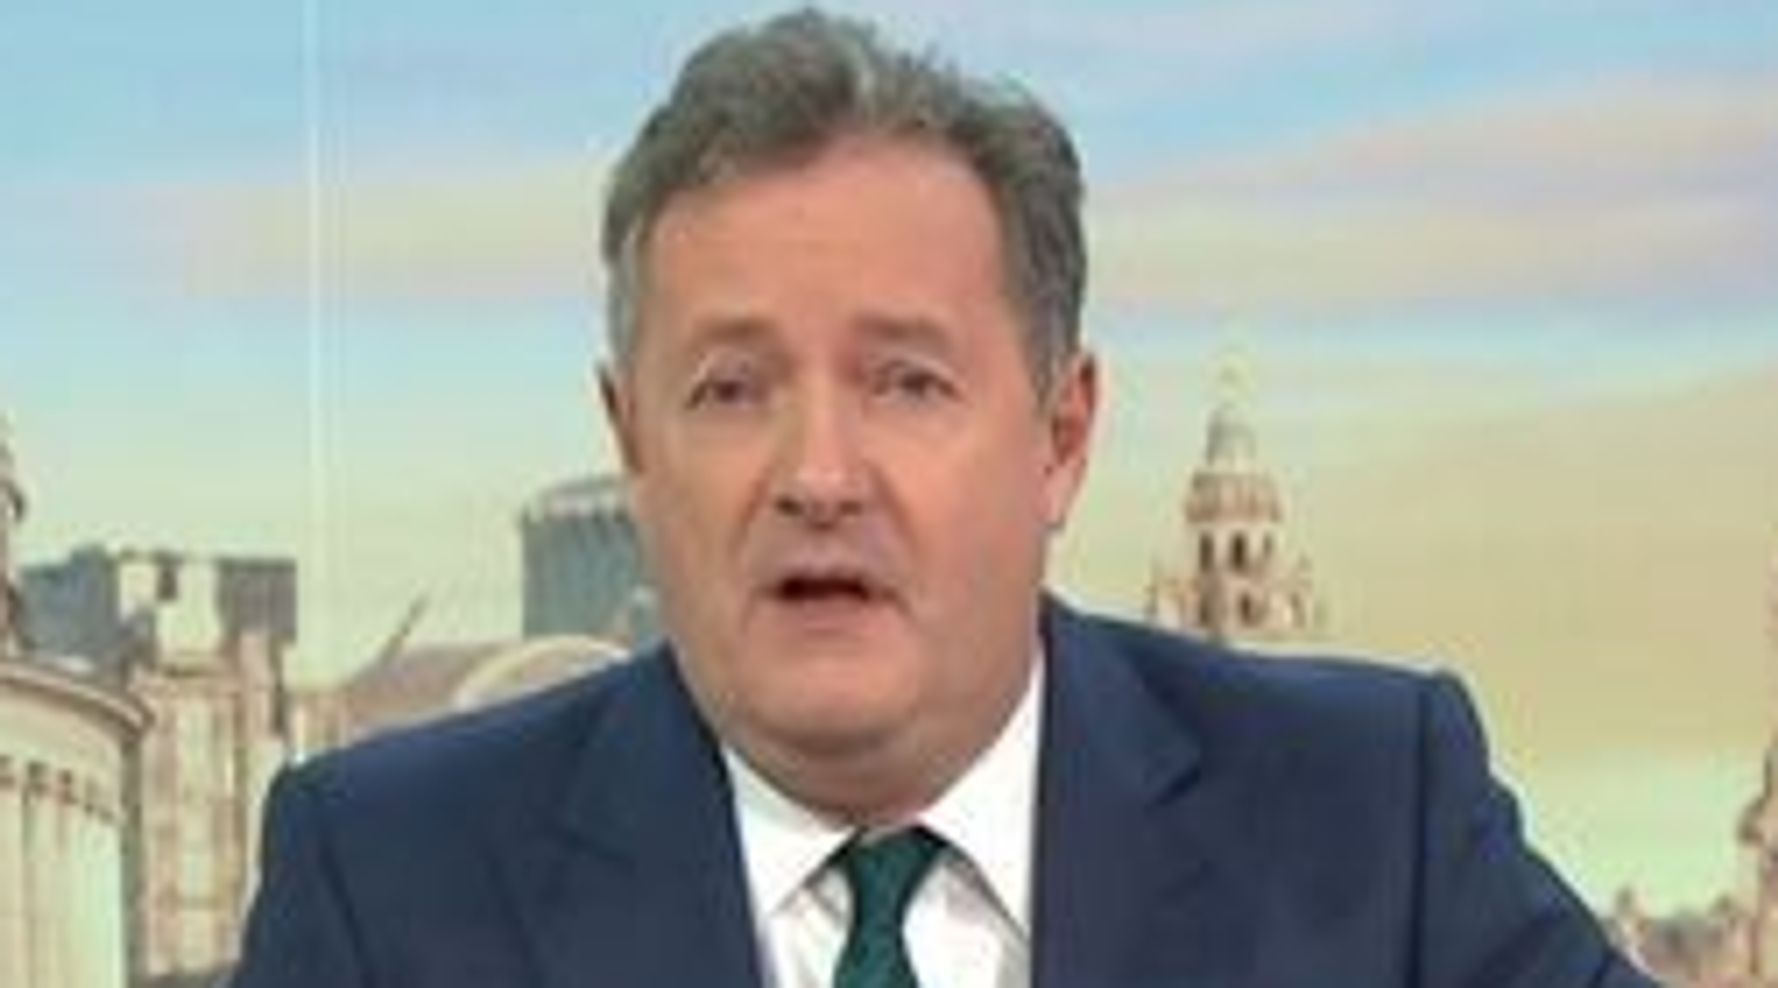 Piers Morgan Reacts To Ofcom's Ruling On His Meghan Markle Comments